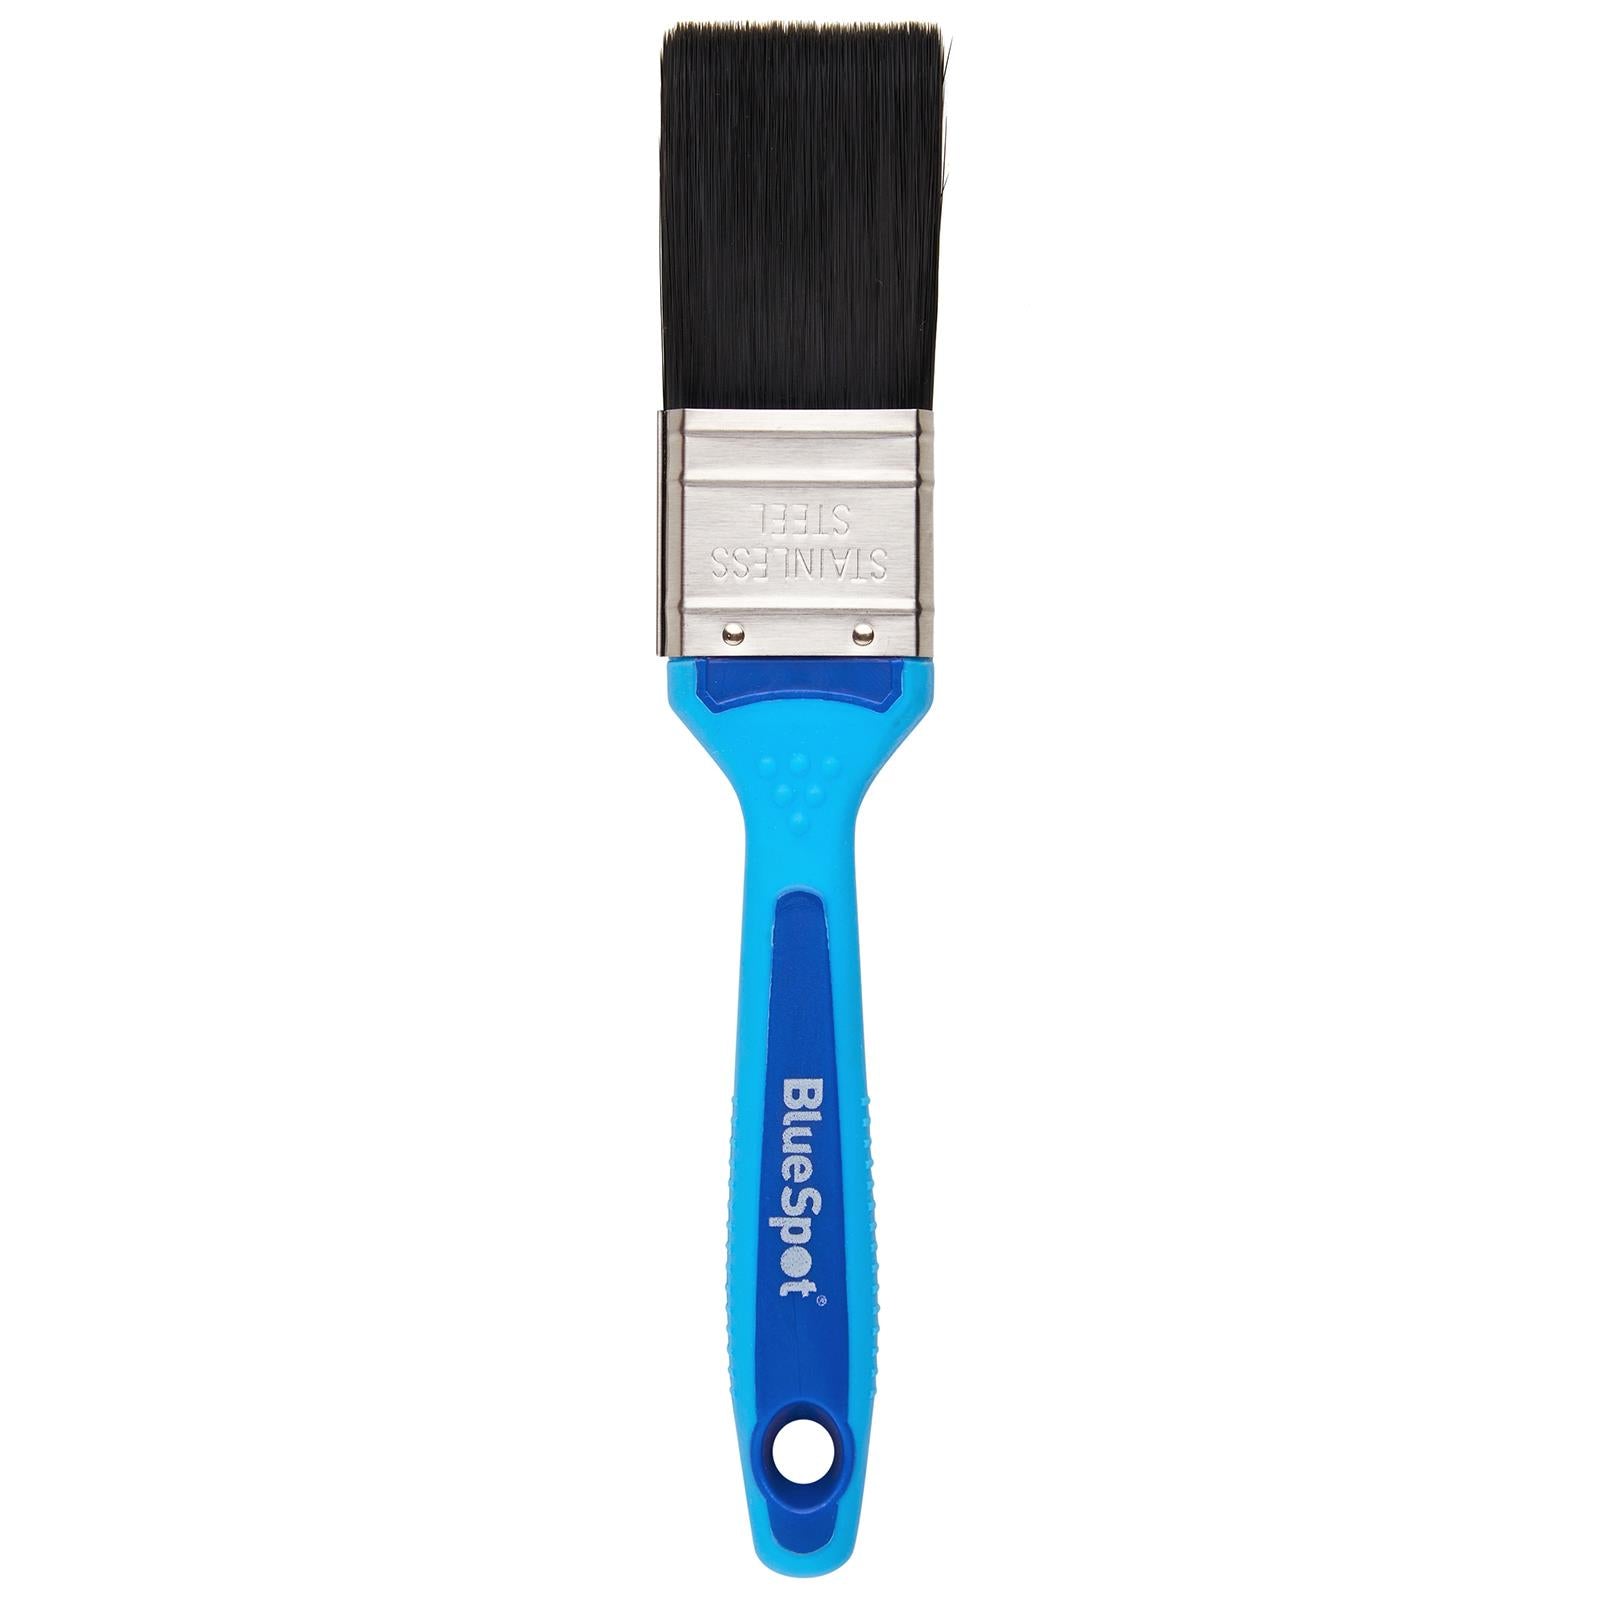 BlueSpot Synthetic Paint Brush with Soft Grip Handle 38mm (1 1/2")